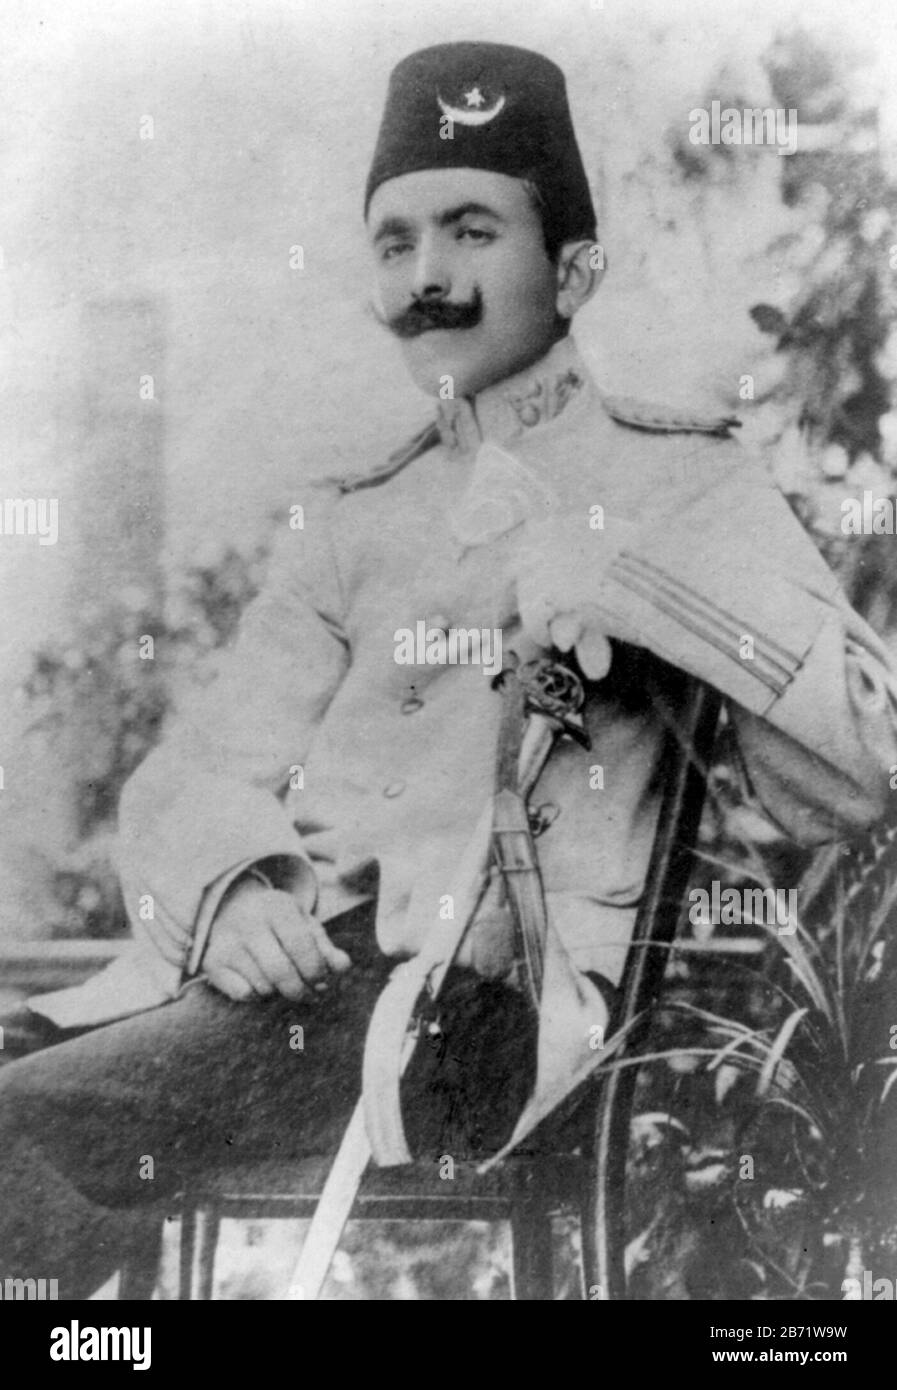 Enver Pasha, Ismail Enver Pasha (1881 – 1922) Ottoman military officer and a leader of the 1908 Young Turk Revolution. Stock Photo